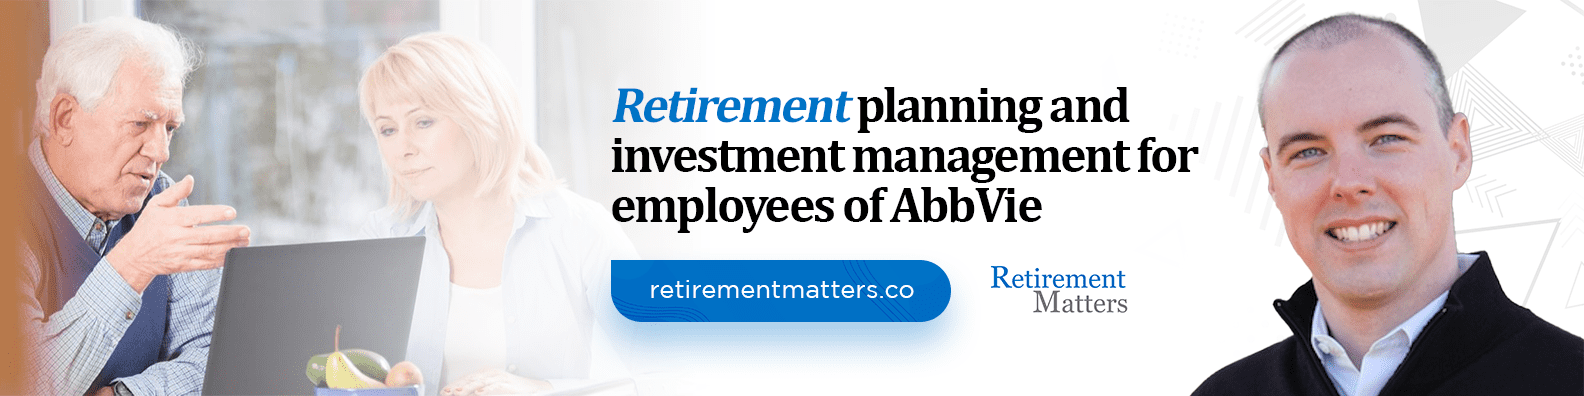 A promotion for retirement planning and investment management services tailored for employees of abbvie, featuring images of a consultant advising a senior couple and a confident professional.